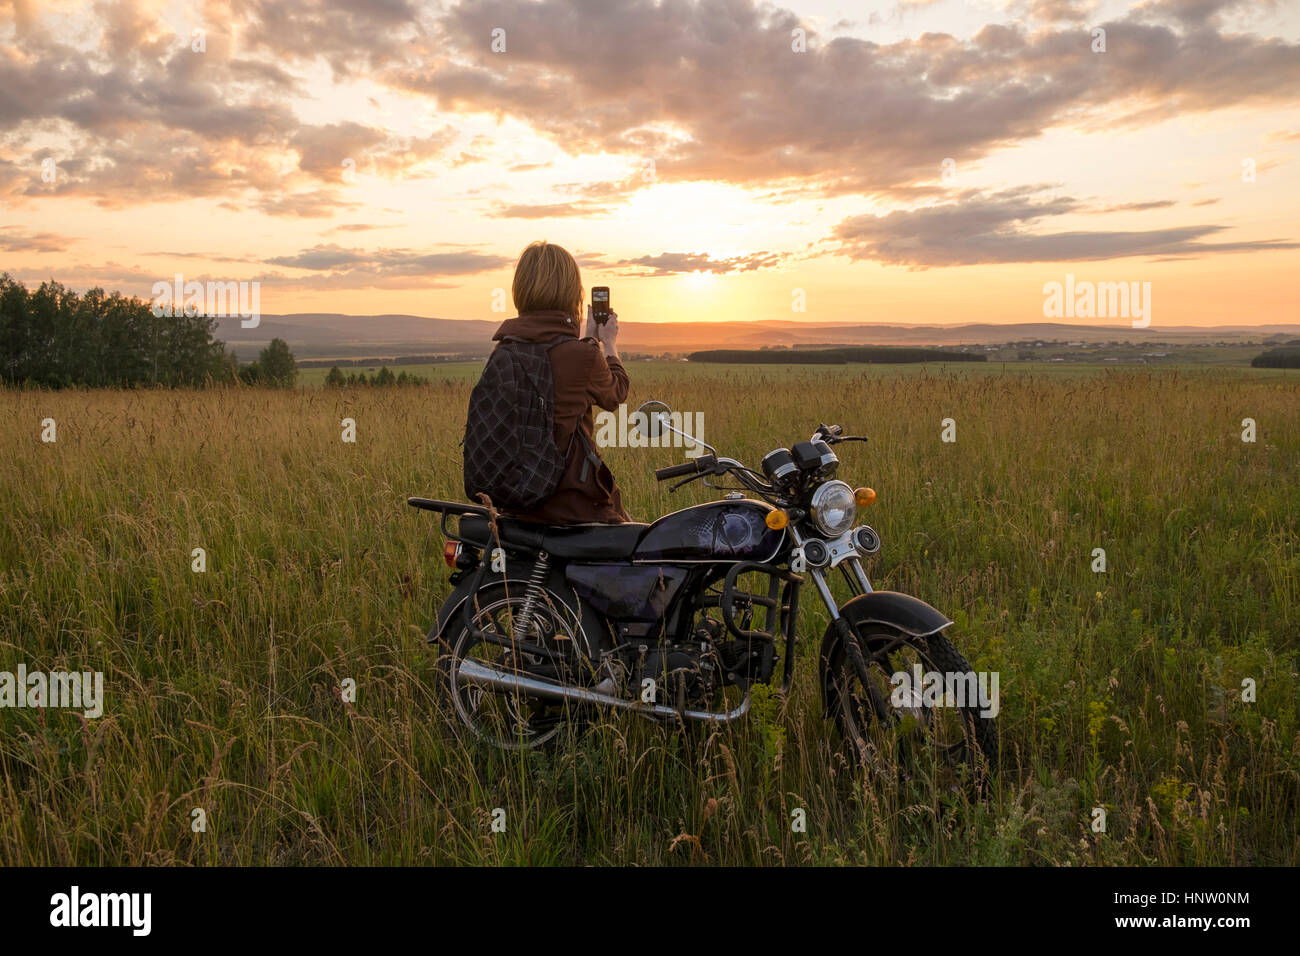 Caucasian woman with motorcycle in field photographing sunset Stock Photo